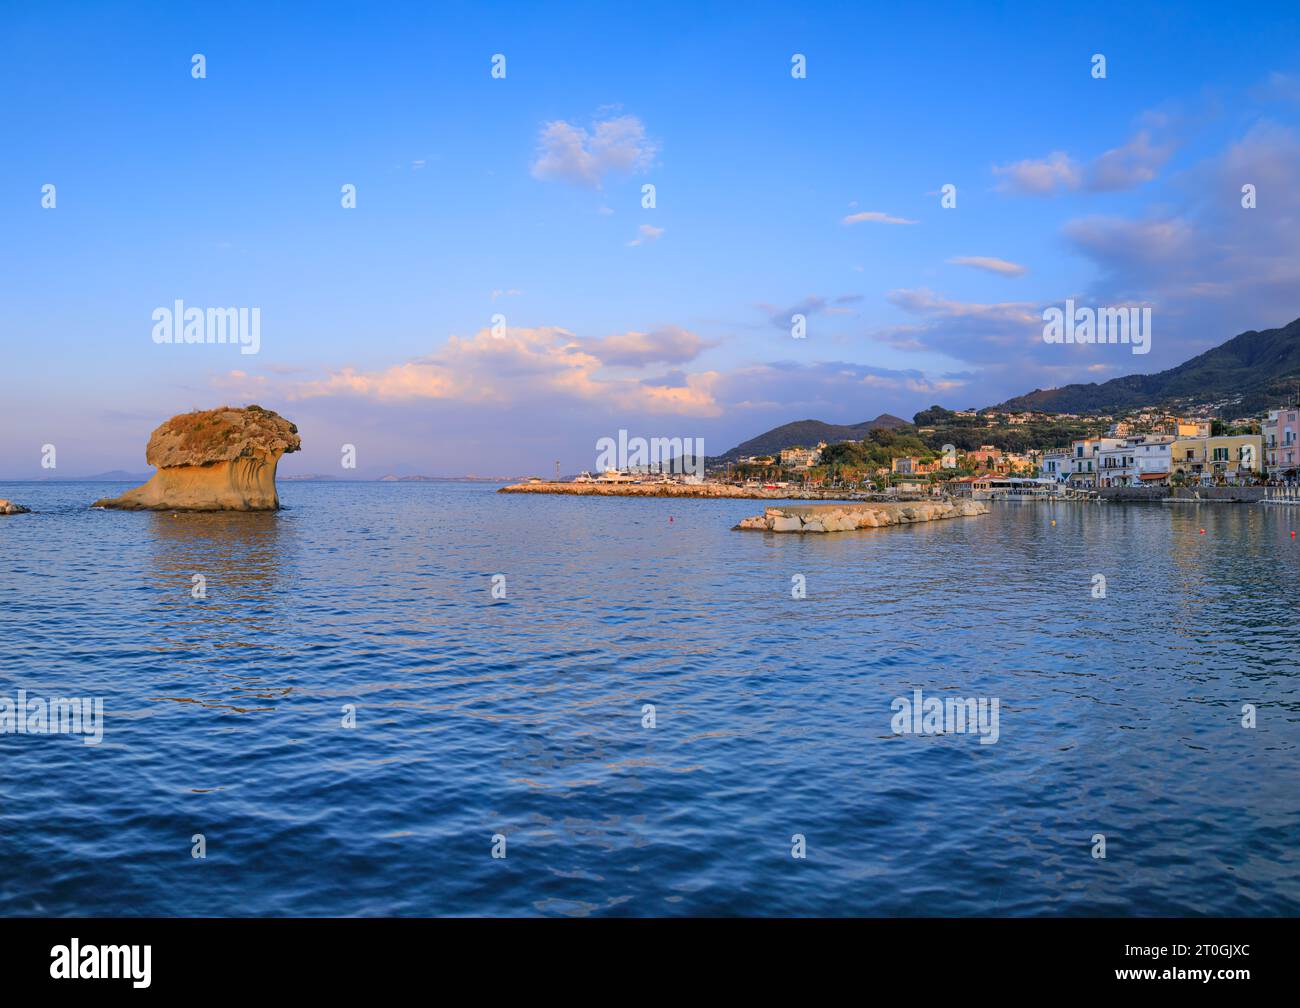 Townscape of Lacco Ameno in Ischia Island. View of the Fungo mushroom rock, a huge block of tuff shaped by the incessant erosion of the sea. Stock Photo